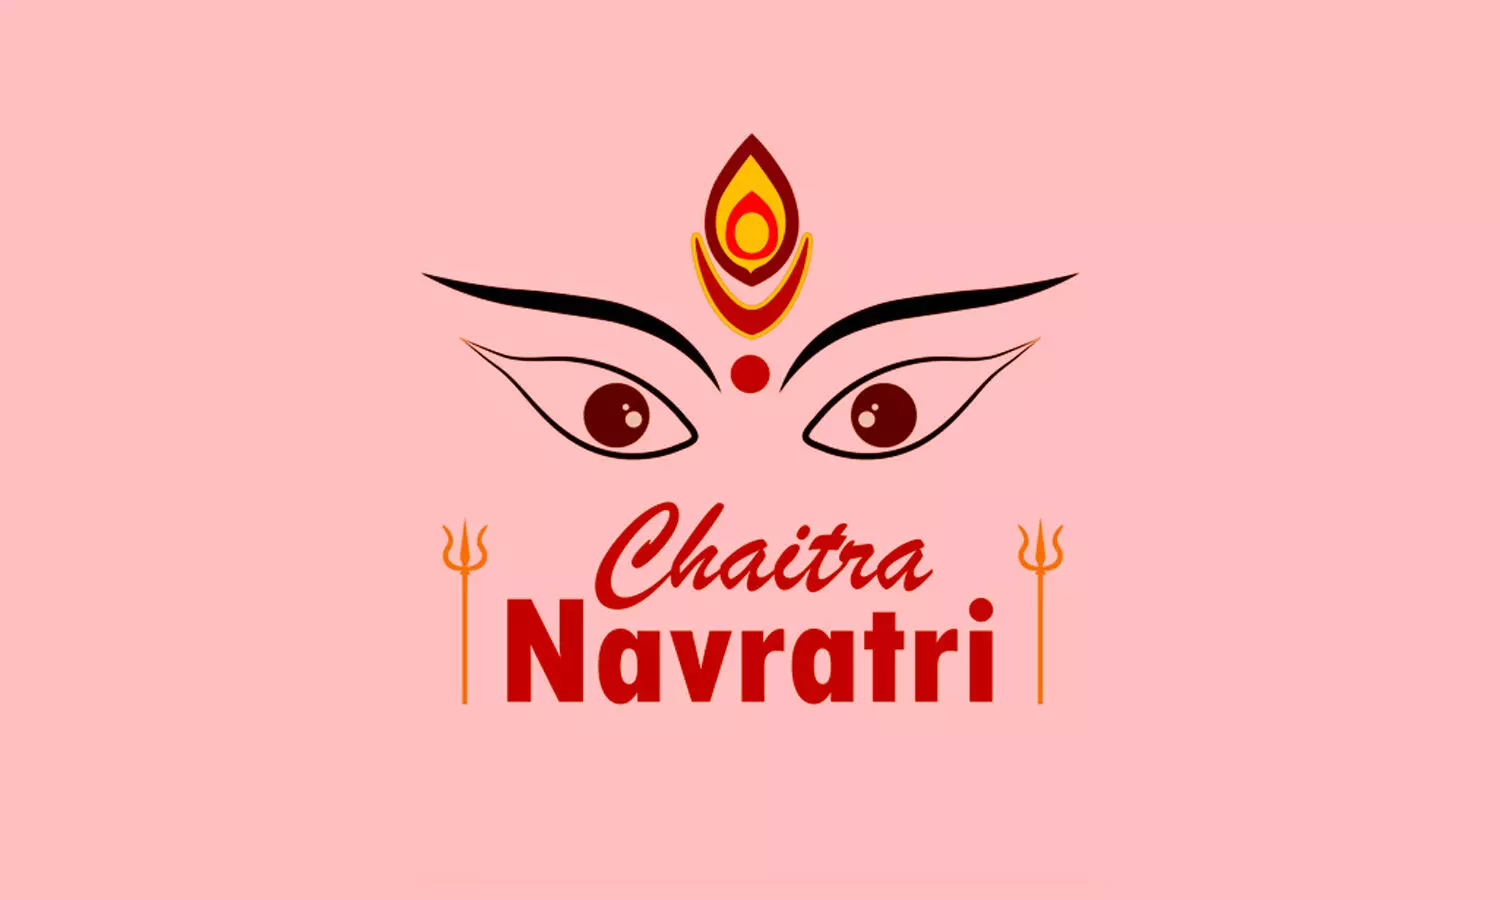 Chaitra Navratri: A Revered Festival in Hinduism